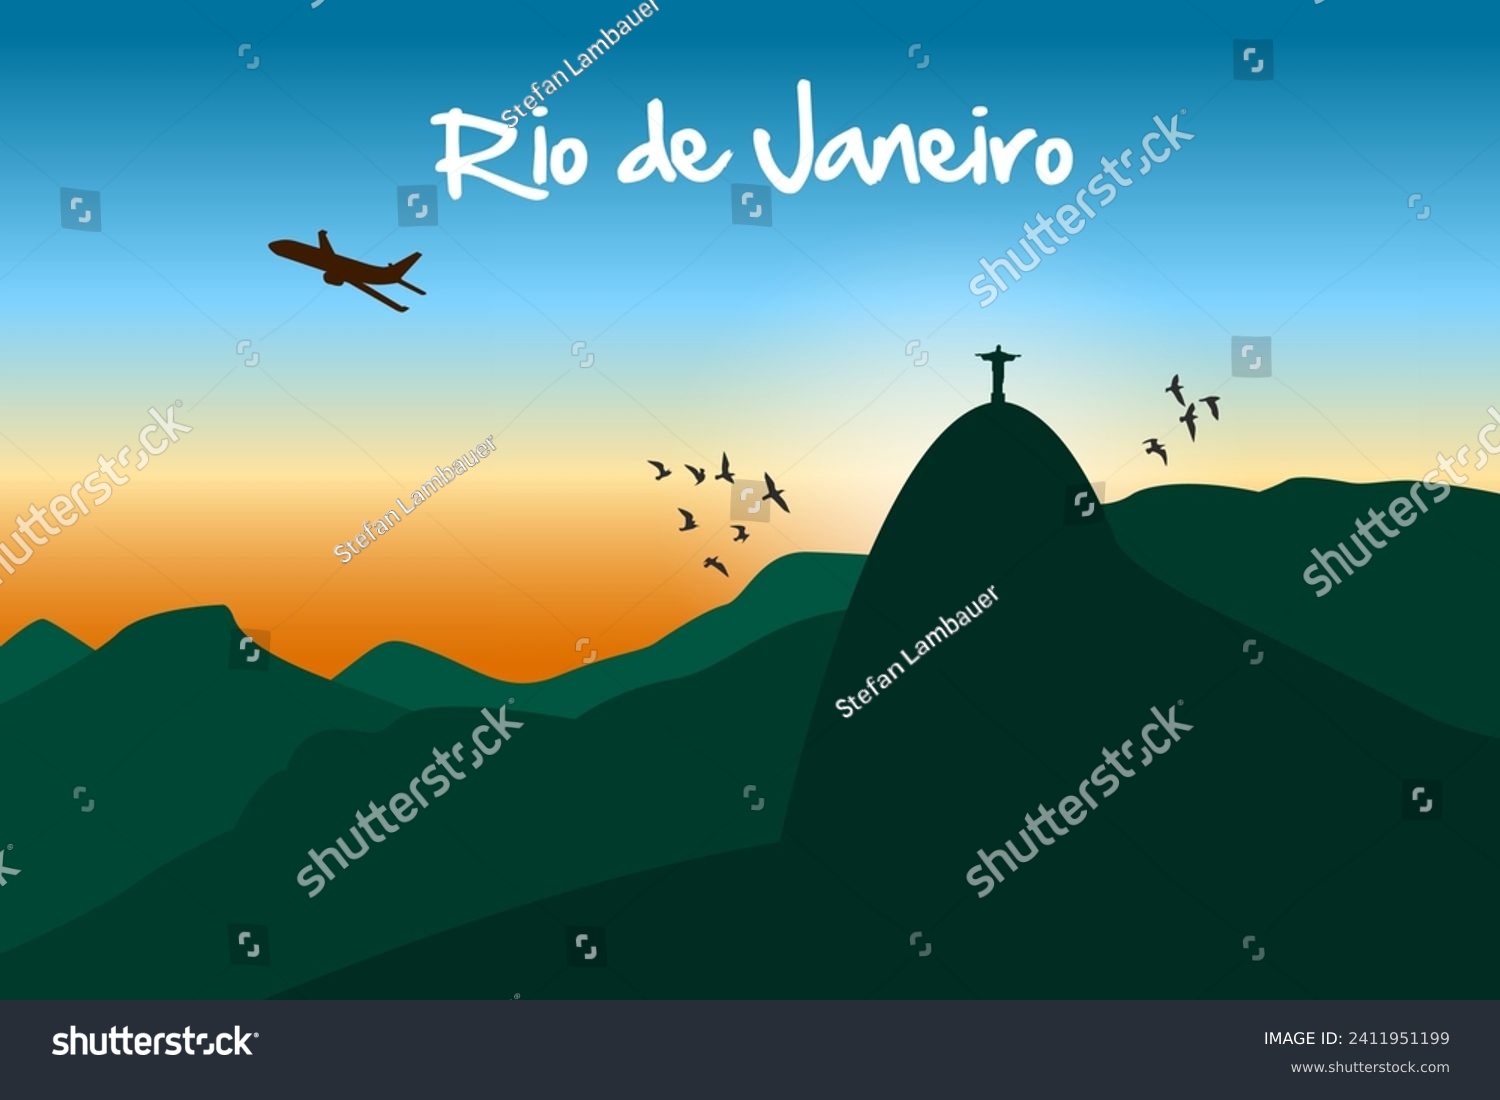 SVG of Rio de janeiro, Brazil. Statue of Christ on Corcovado Mountain during sunset with blue sky. Airplane silhouette in the sky and birds flying. Tijuca National Park. Illustration in eps. svg